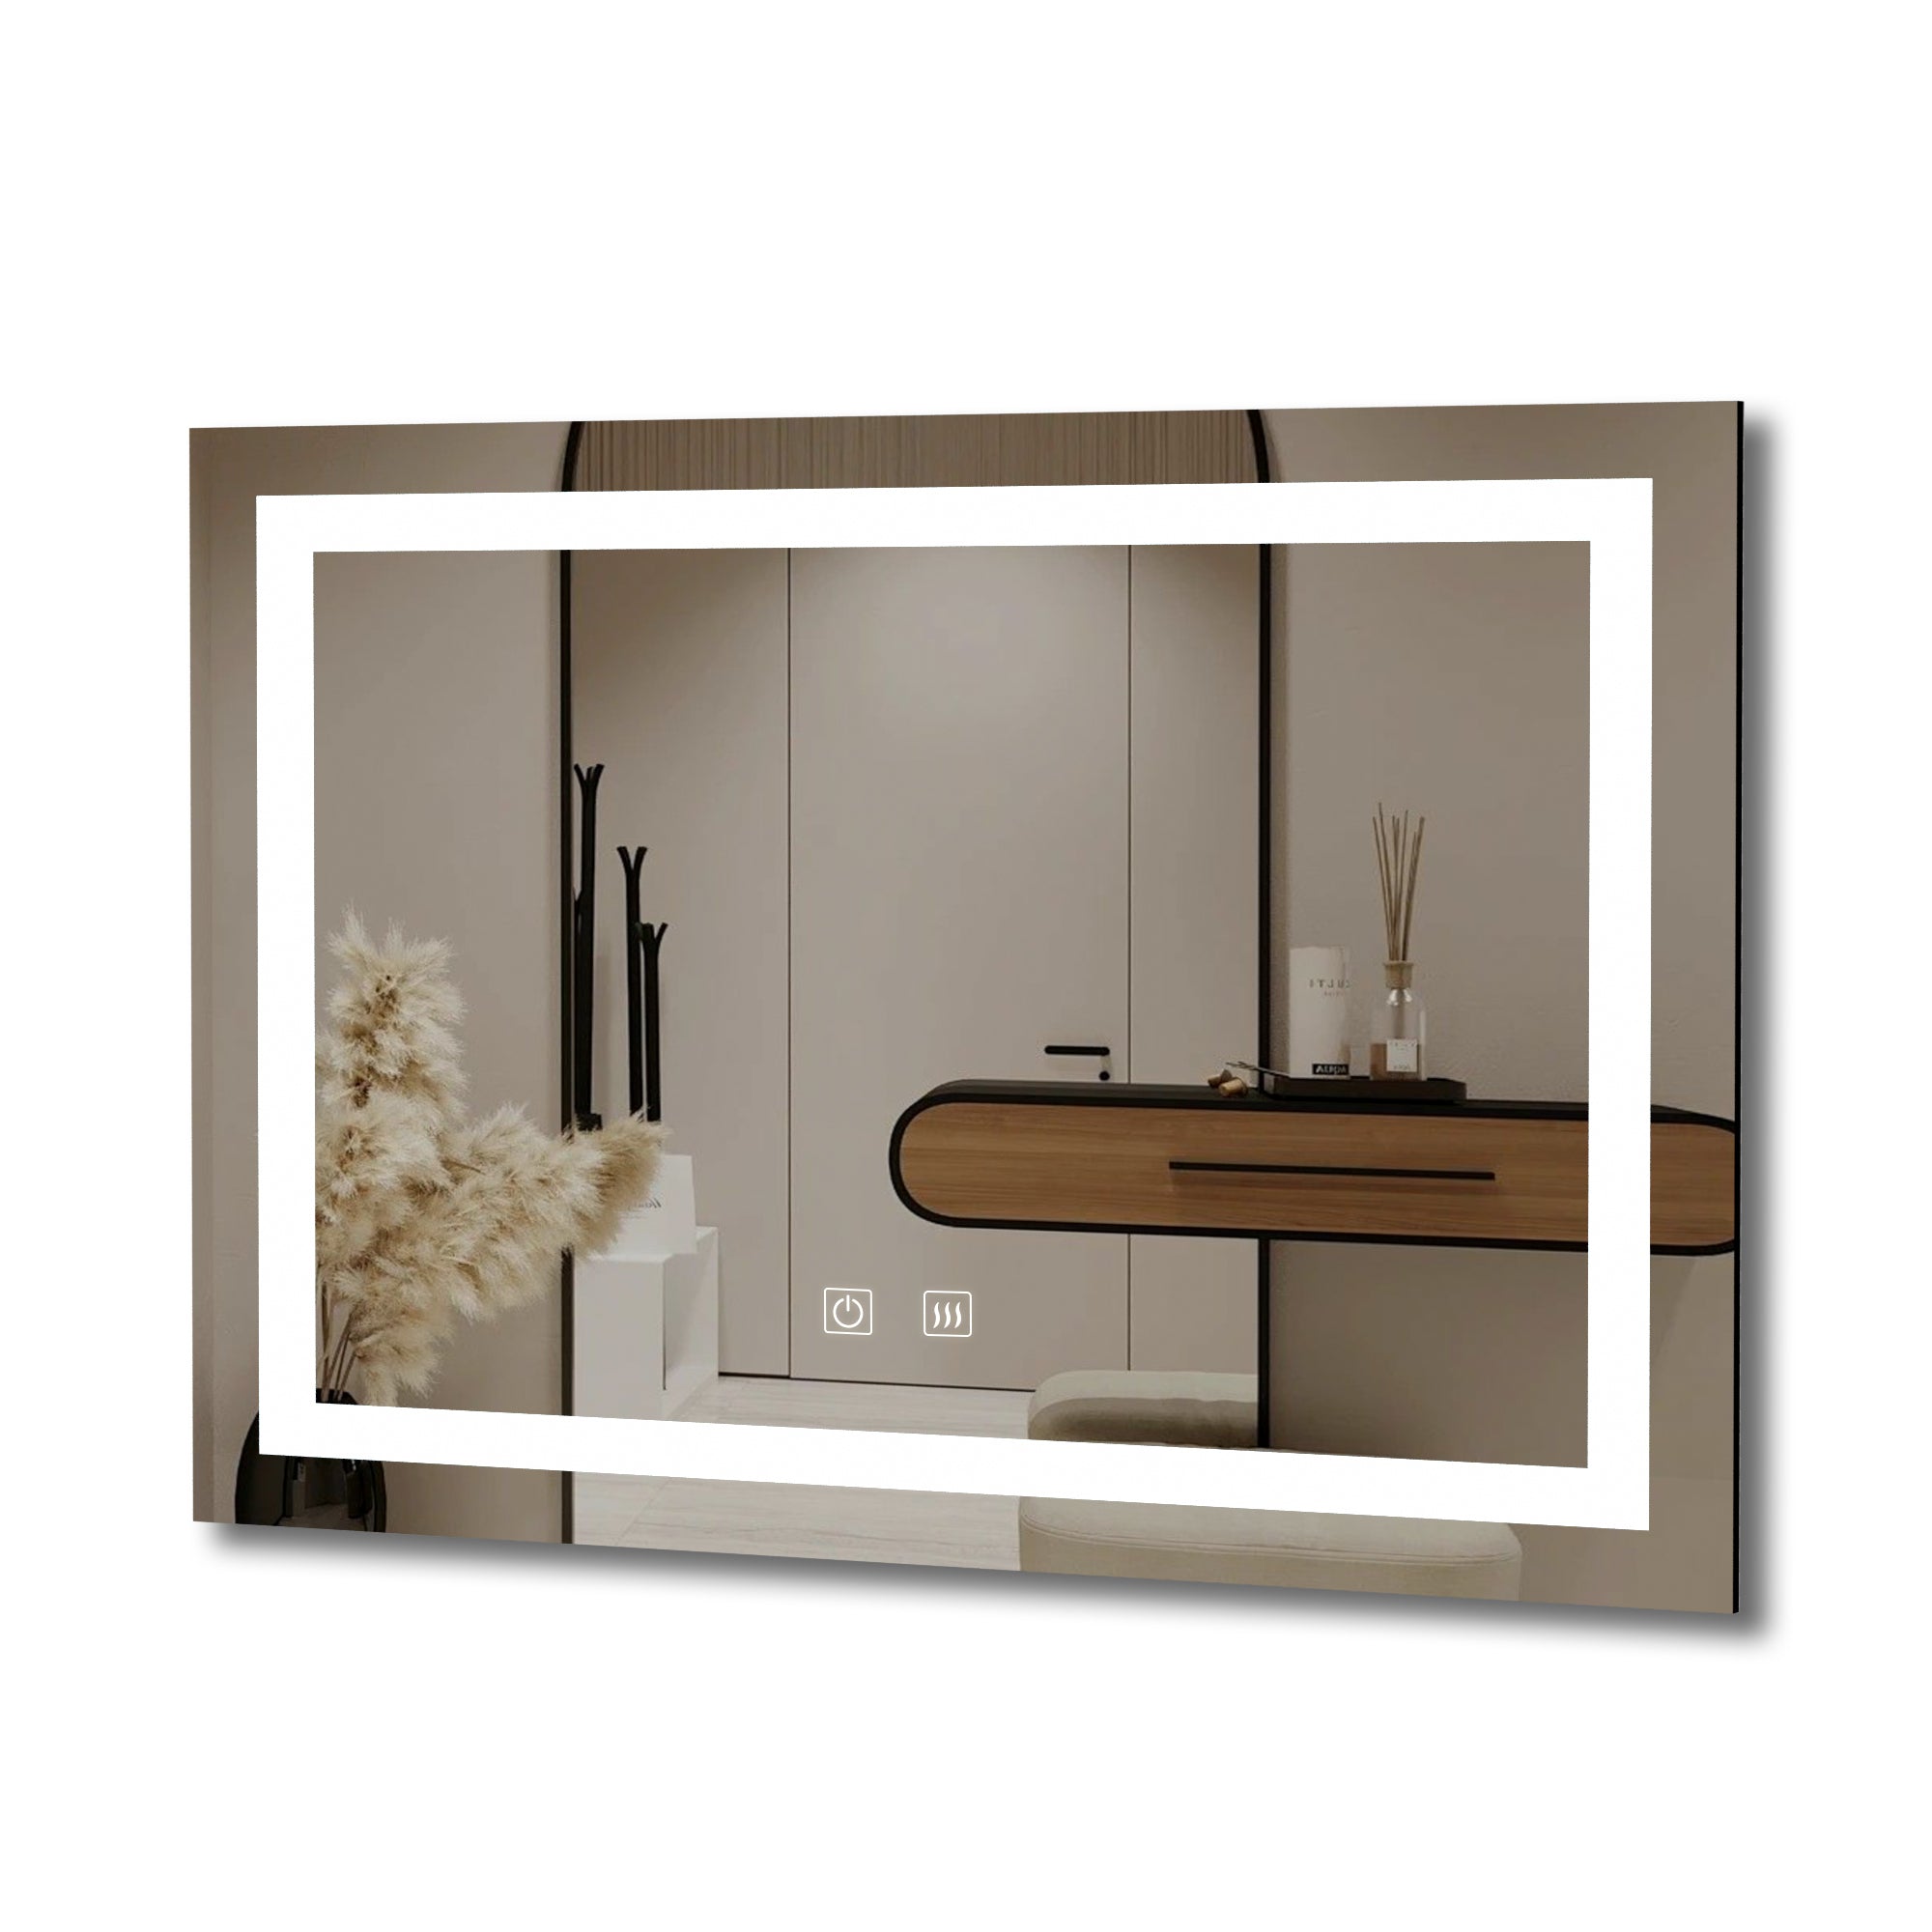 MAICOSY 36"x28" LED Bathroom Mirror Vanity Makeup Mirrors Touch Anti-fog Dimmable